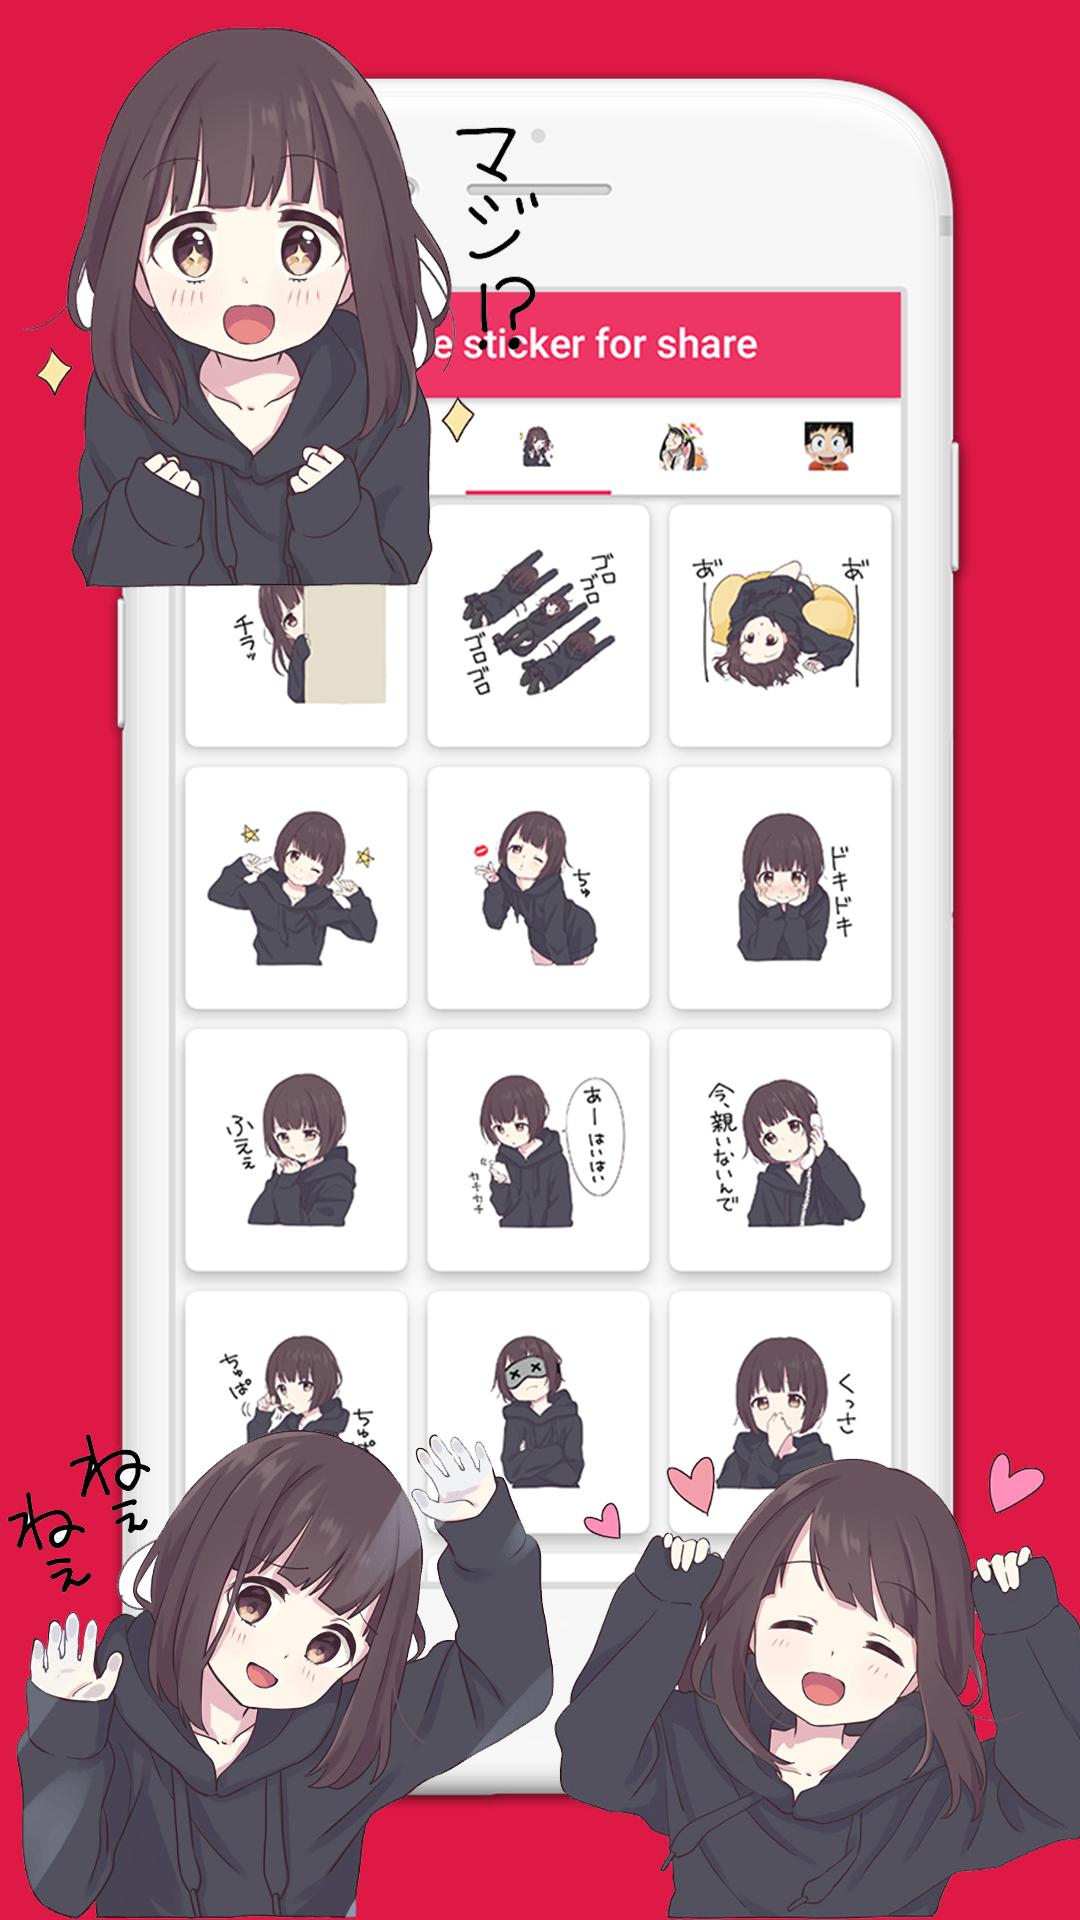 Kawaii Anime Sticker Free Anime Sticker For Share For Android